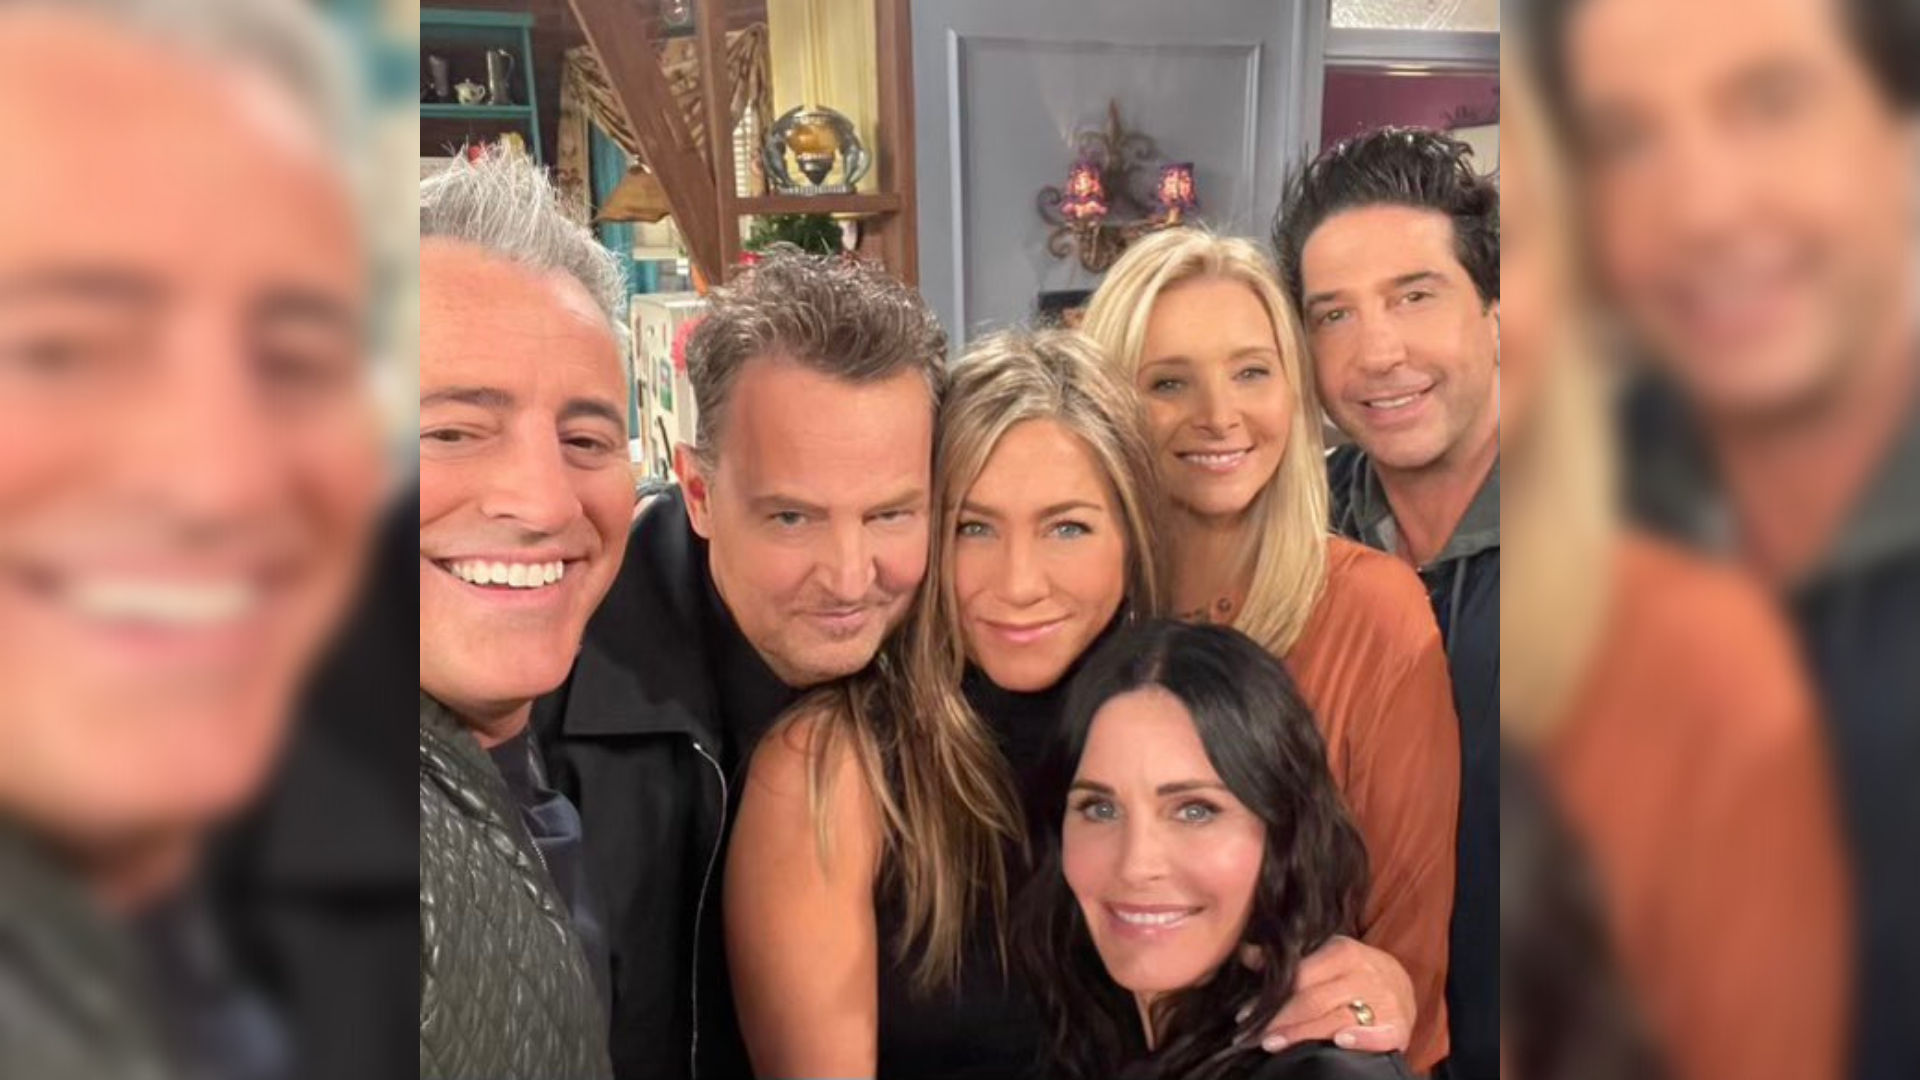 ‘Friends’ top guide for many, from polishing language to conveying emotion